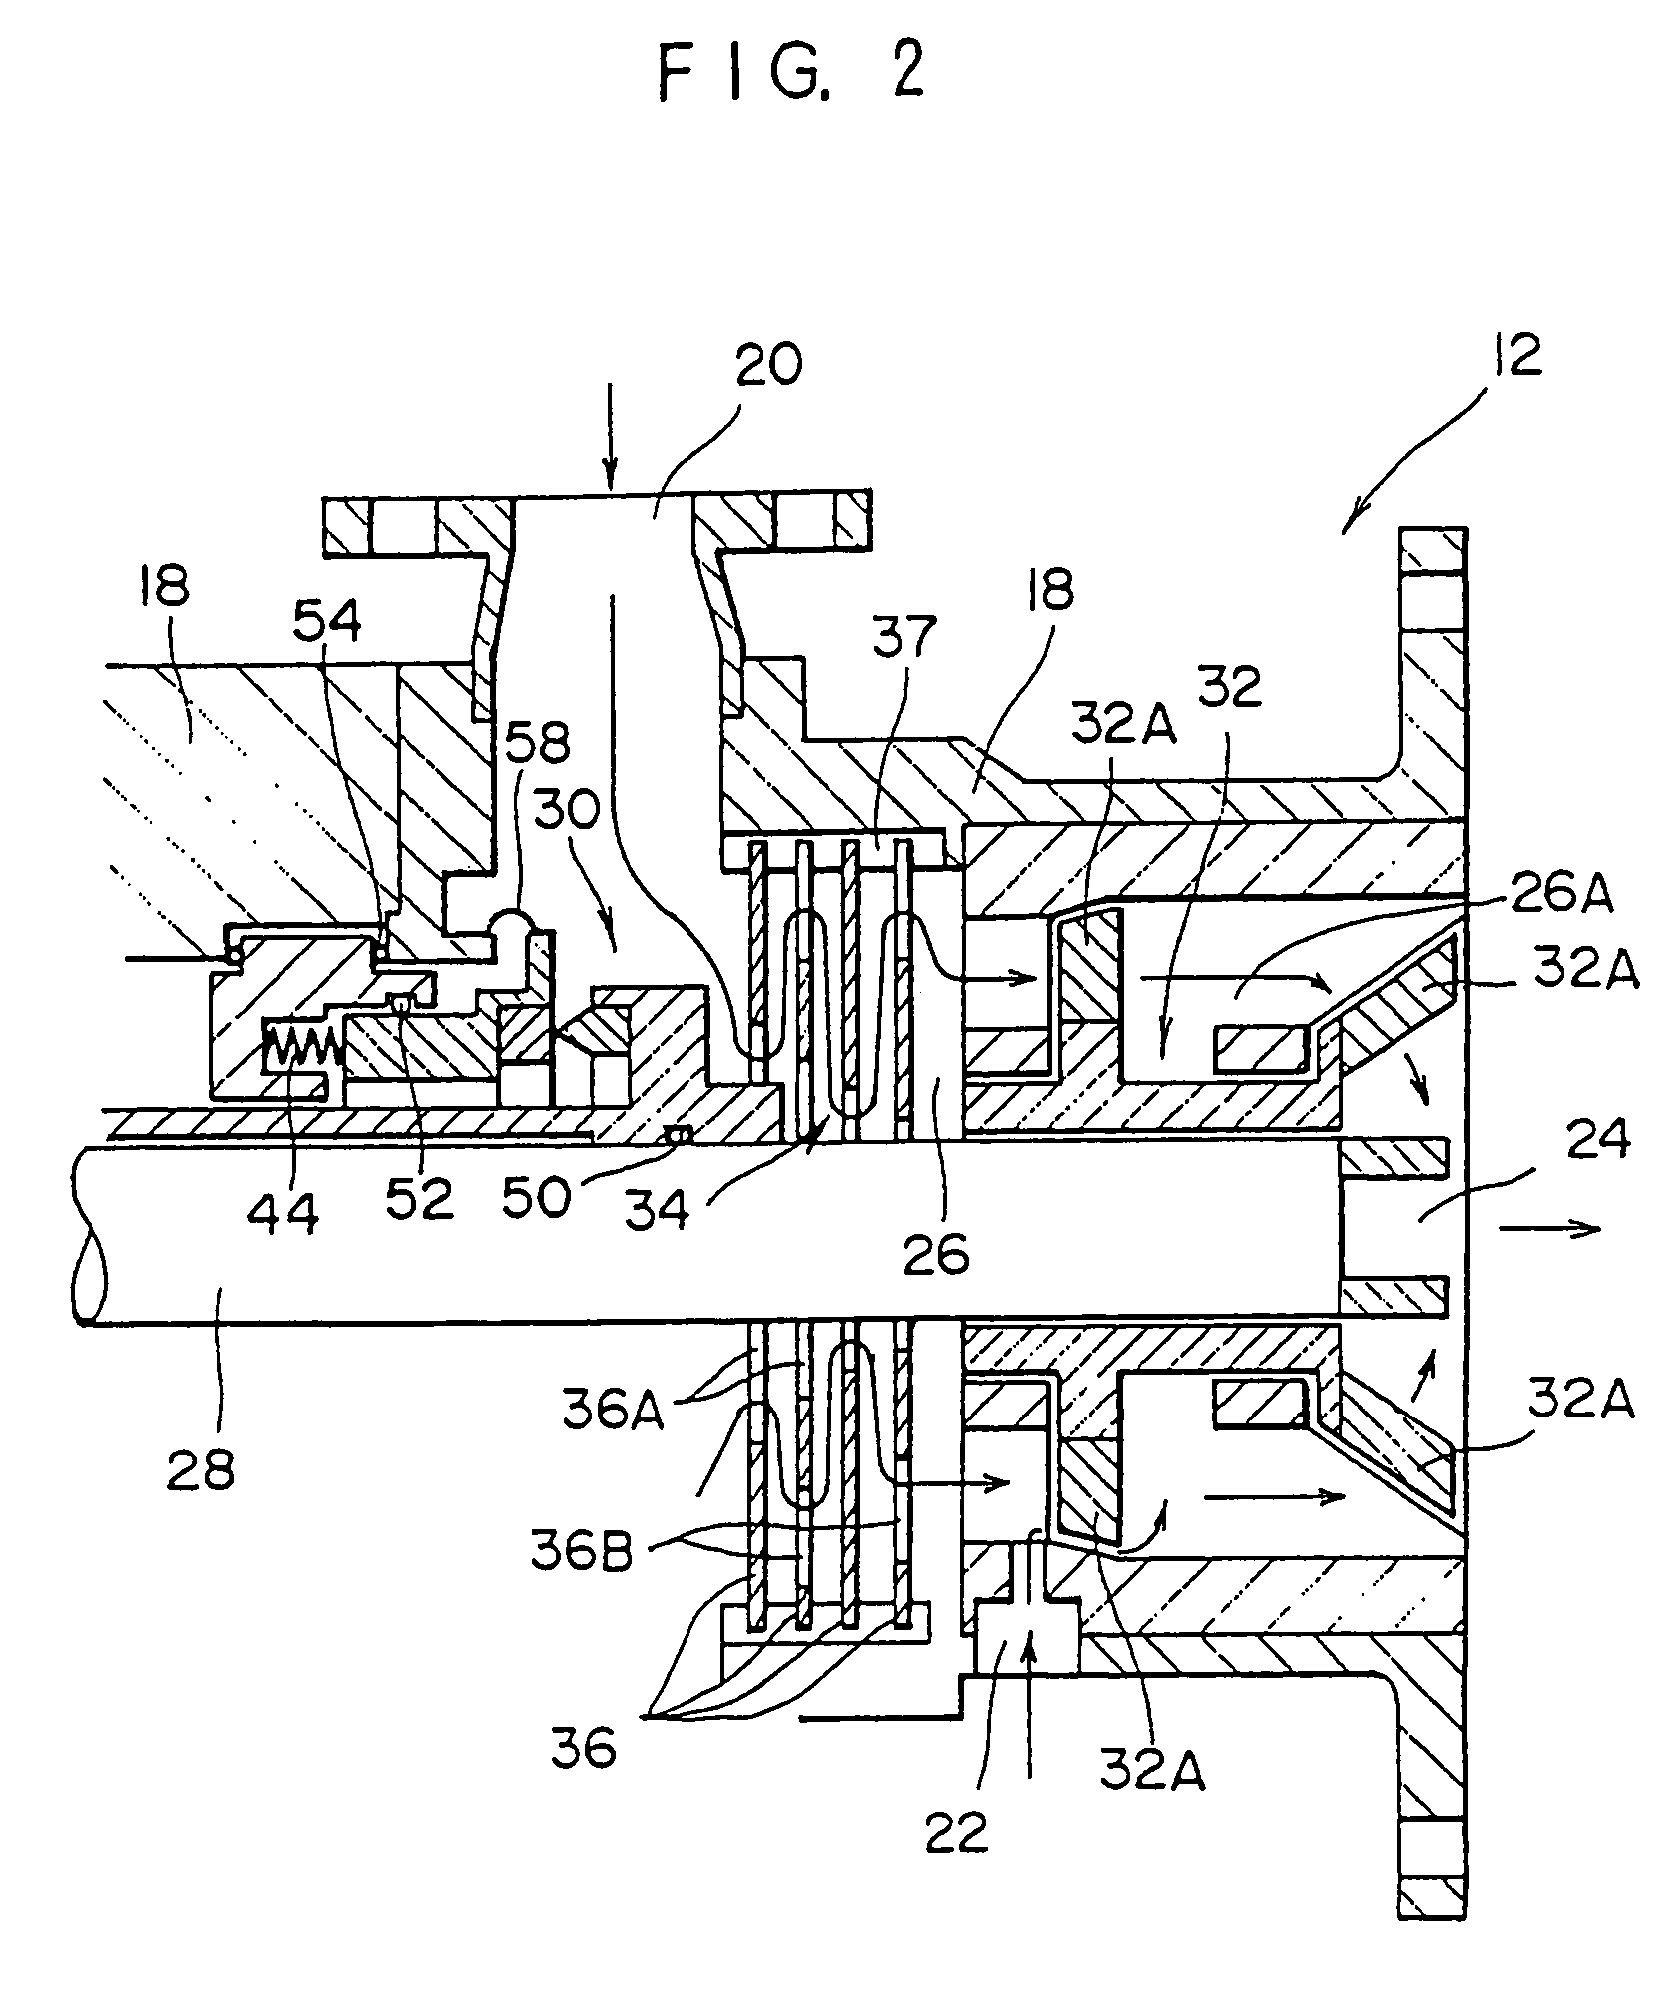 In-line mixing apparatus, process for mixing reactive chemical solutions, and process for producing microcapsules